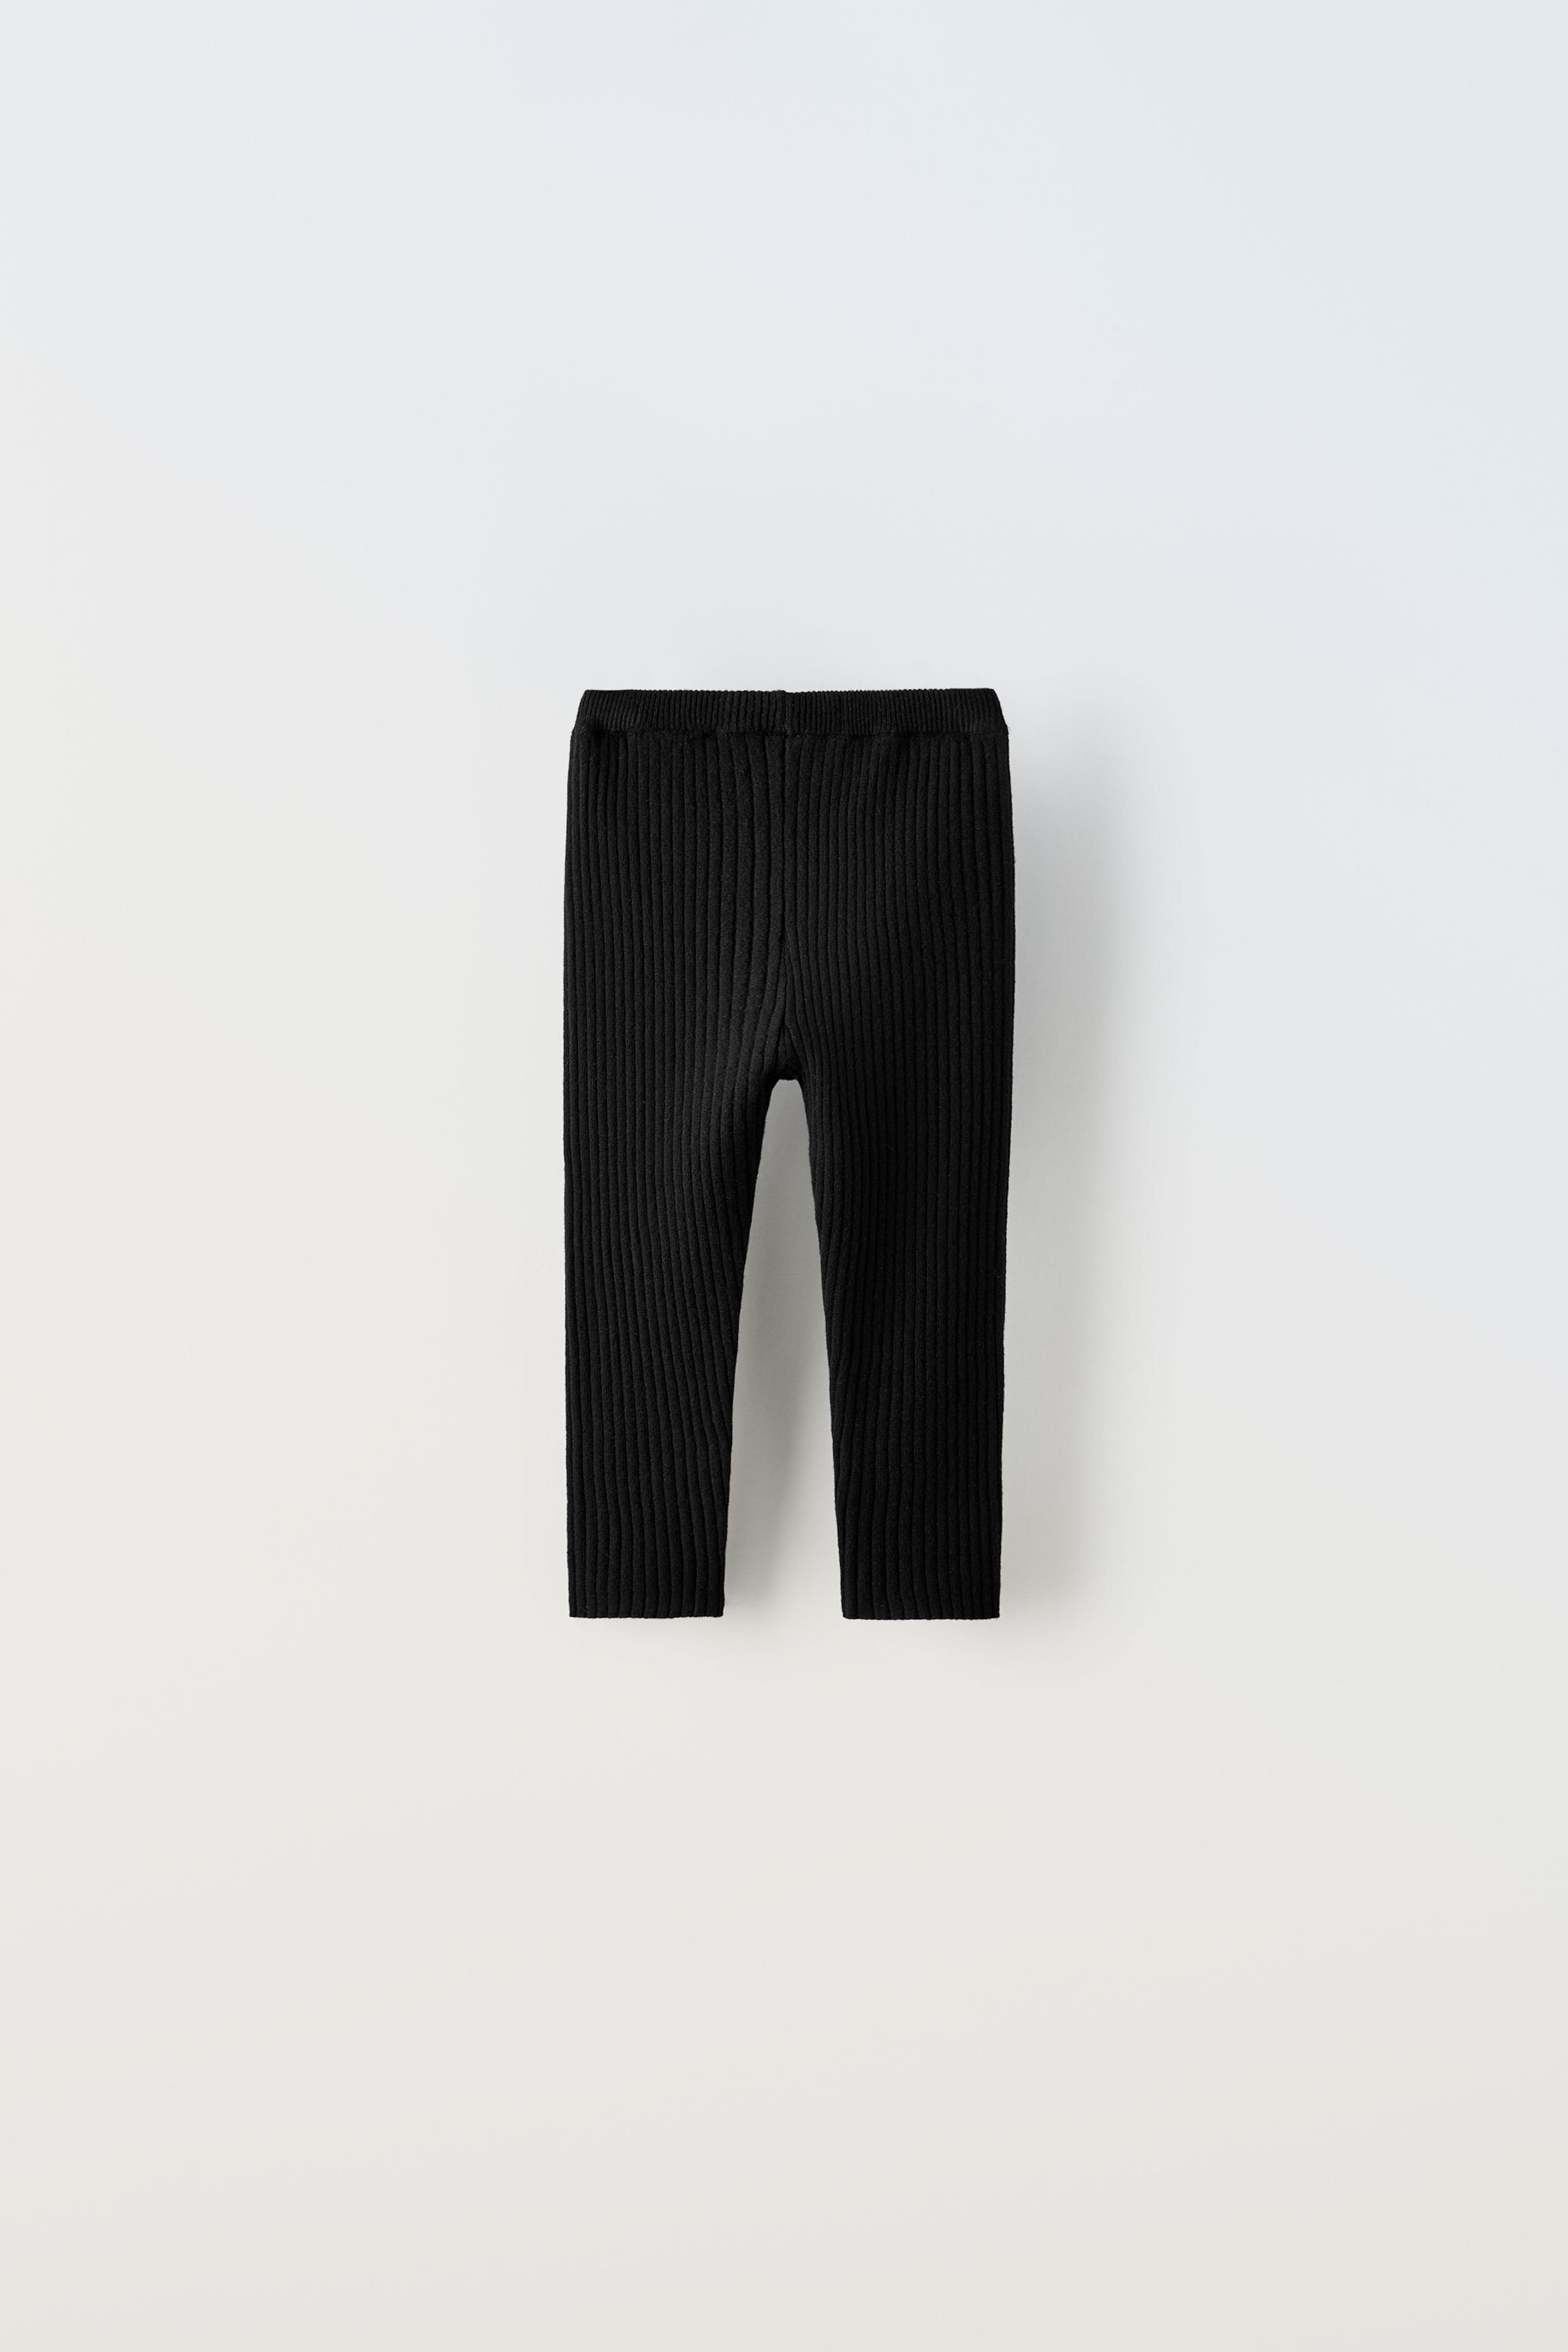 Zara Ribbed Leggings Co Ordway  International Society of Precision  Agriculture